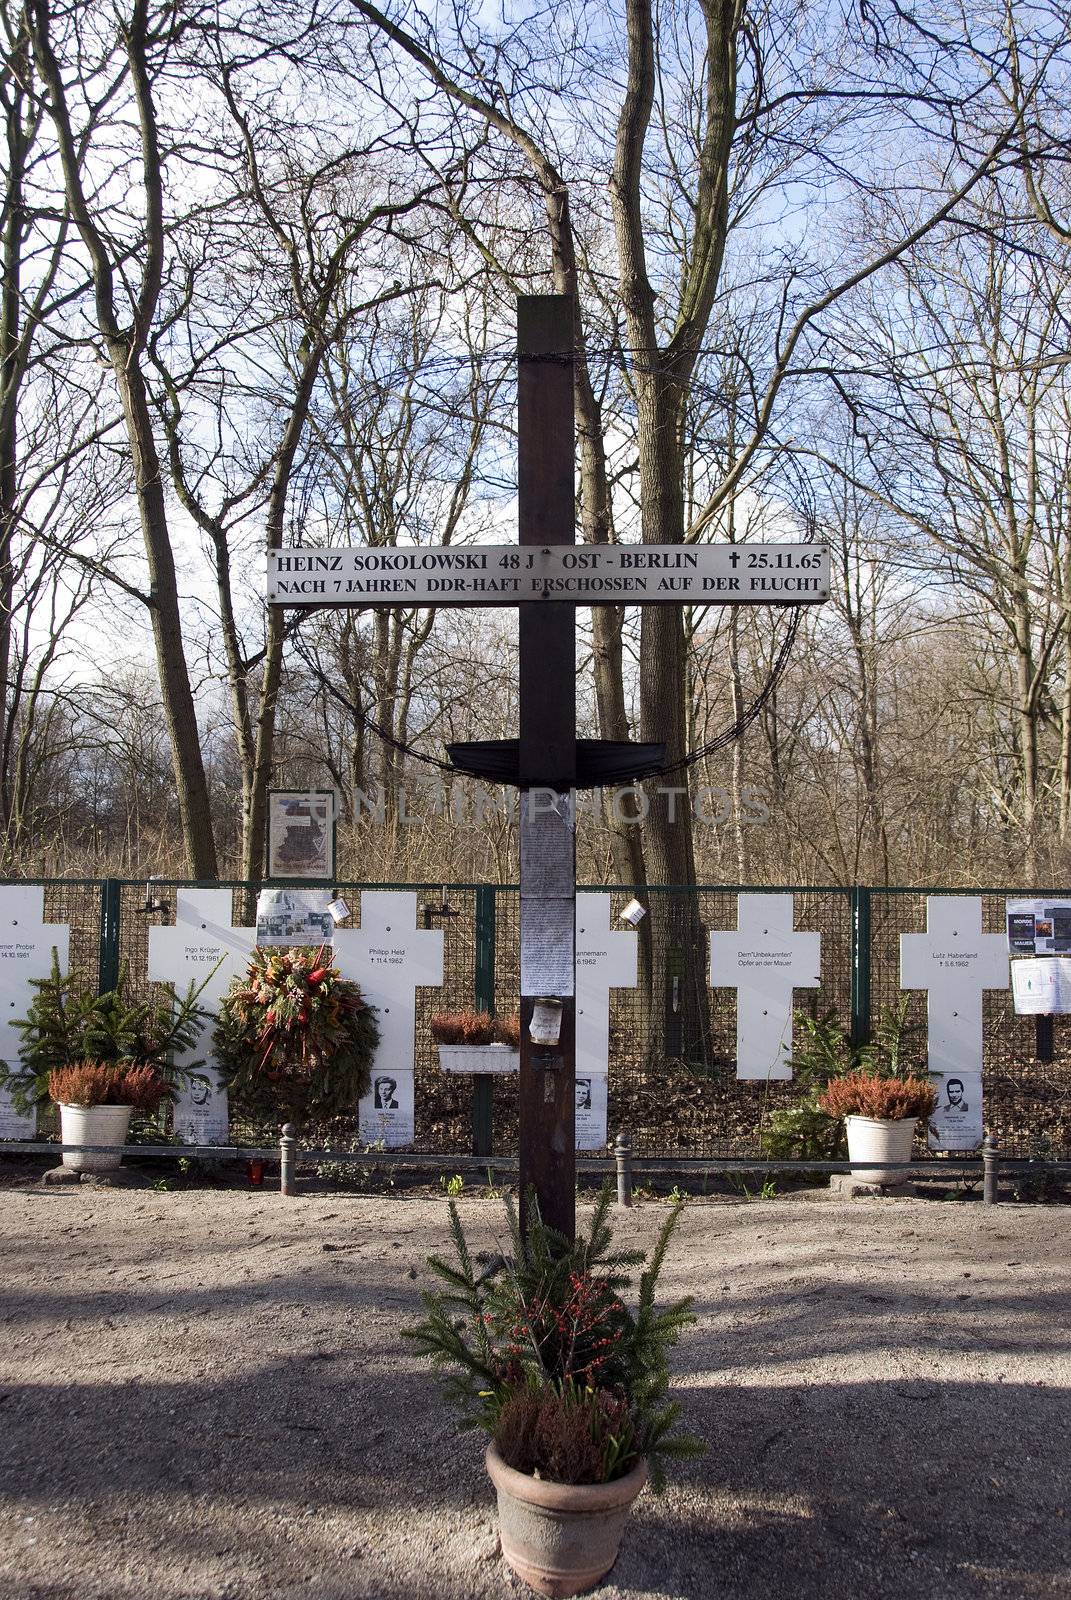 grave crosses near the brandenburger tor Berlin from people try to escape east berlin during war